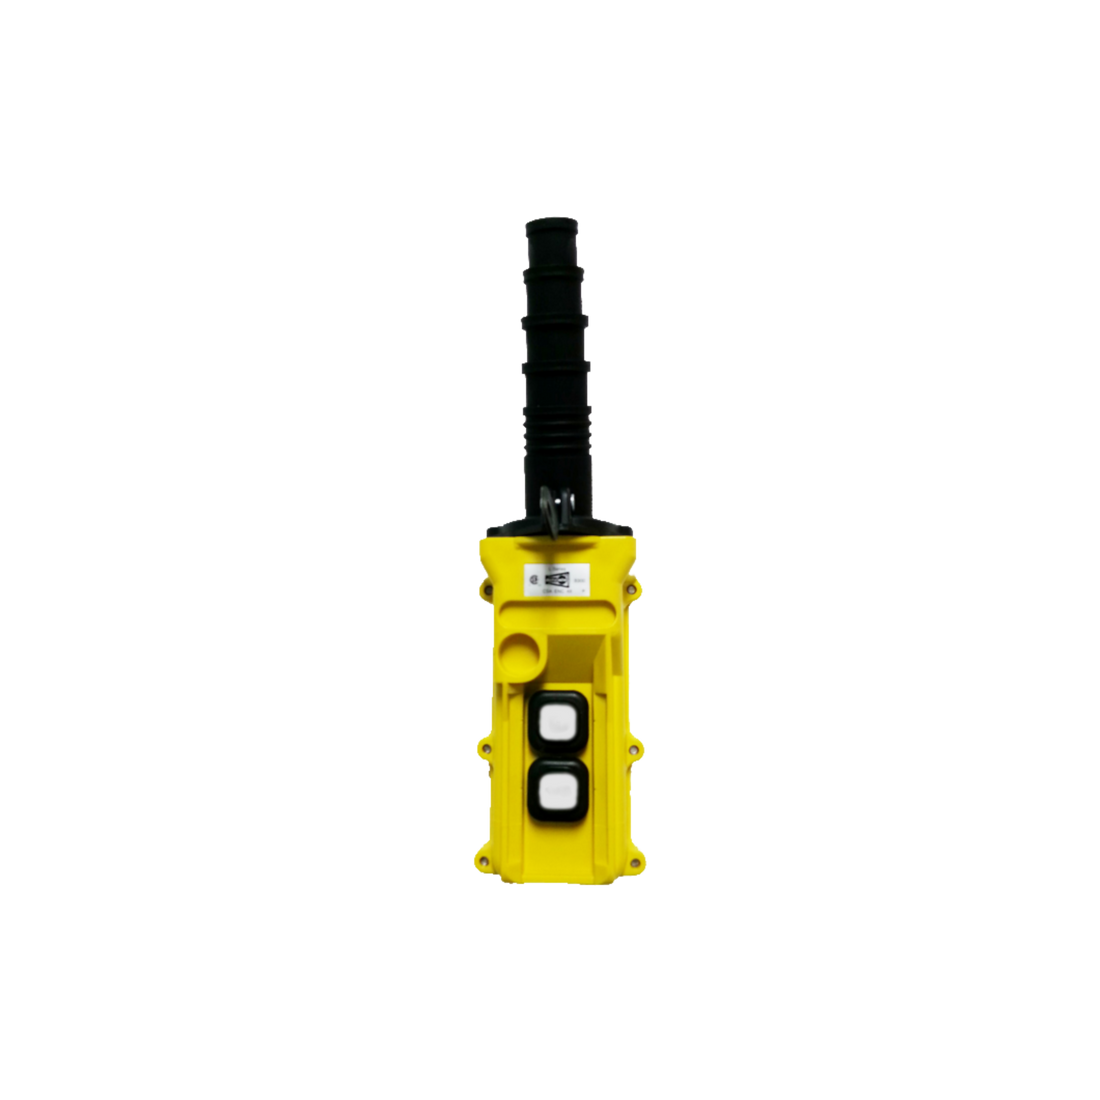 2-Button Pendant, Single-, Dual-Speed Switches (L2-S-1, L2-S-2) Yellow